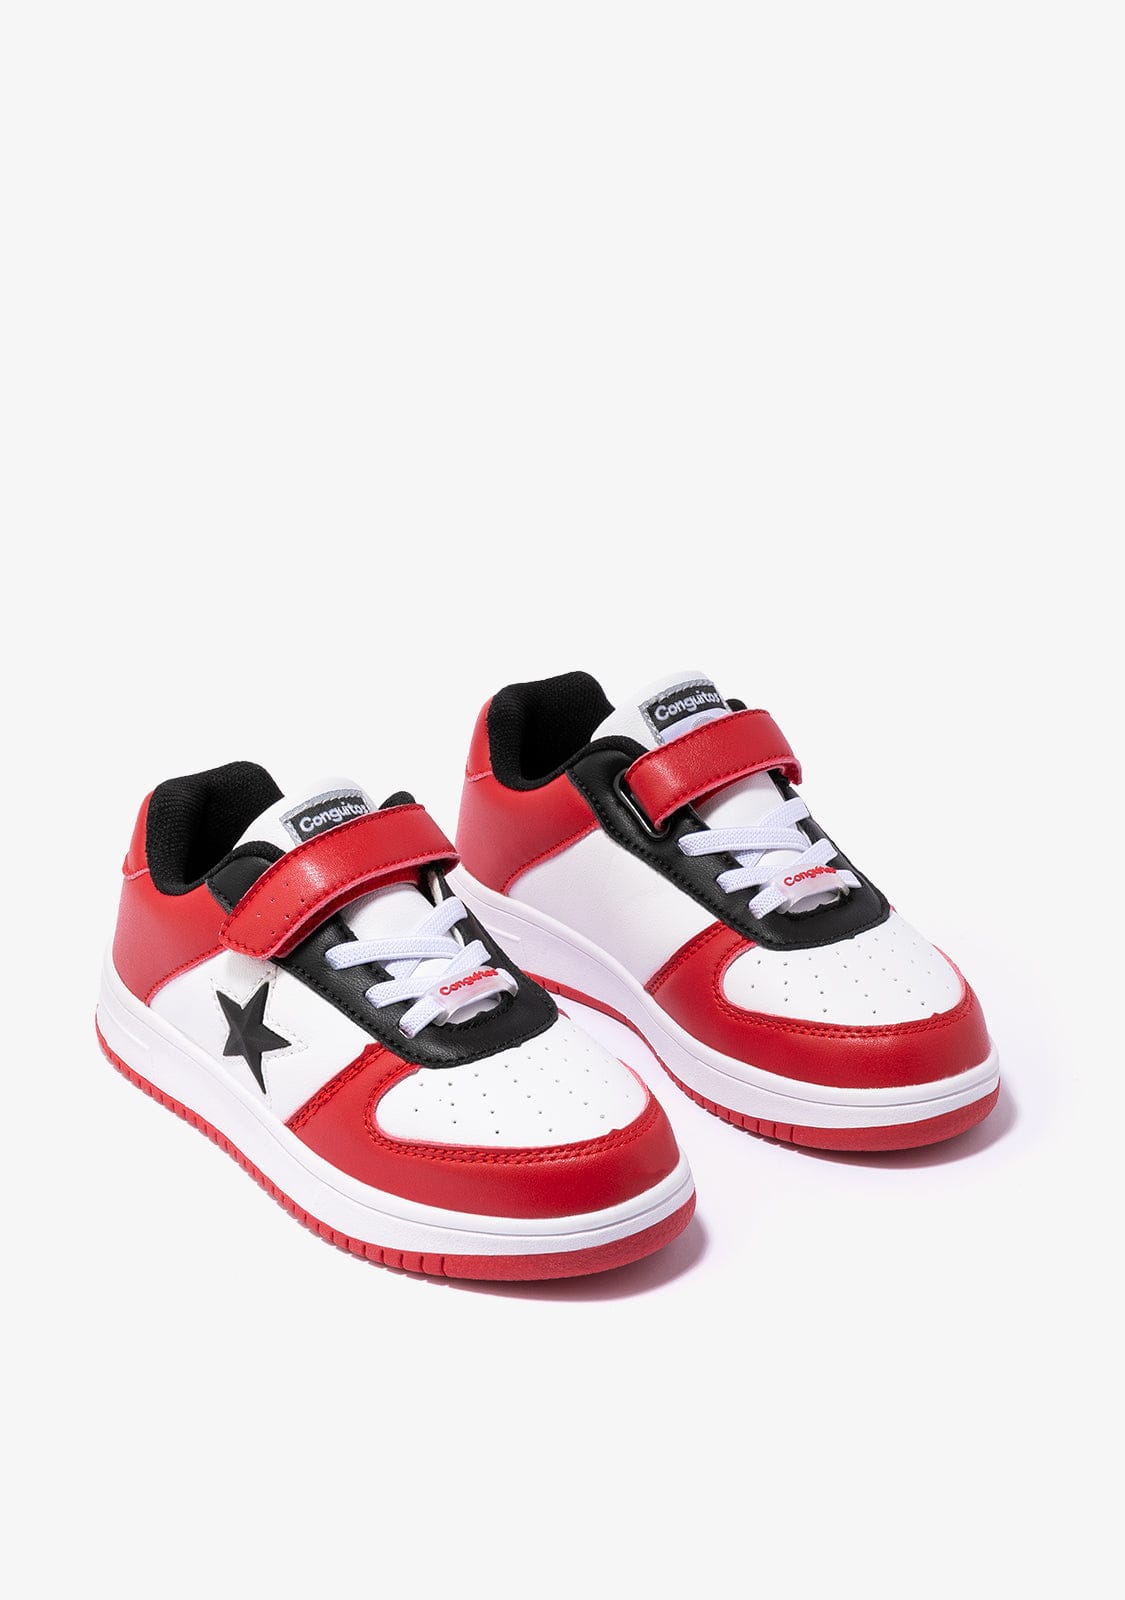 CONGUITOS Shoes Unisex Red - White Star With Lights Sneakers